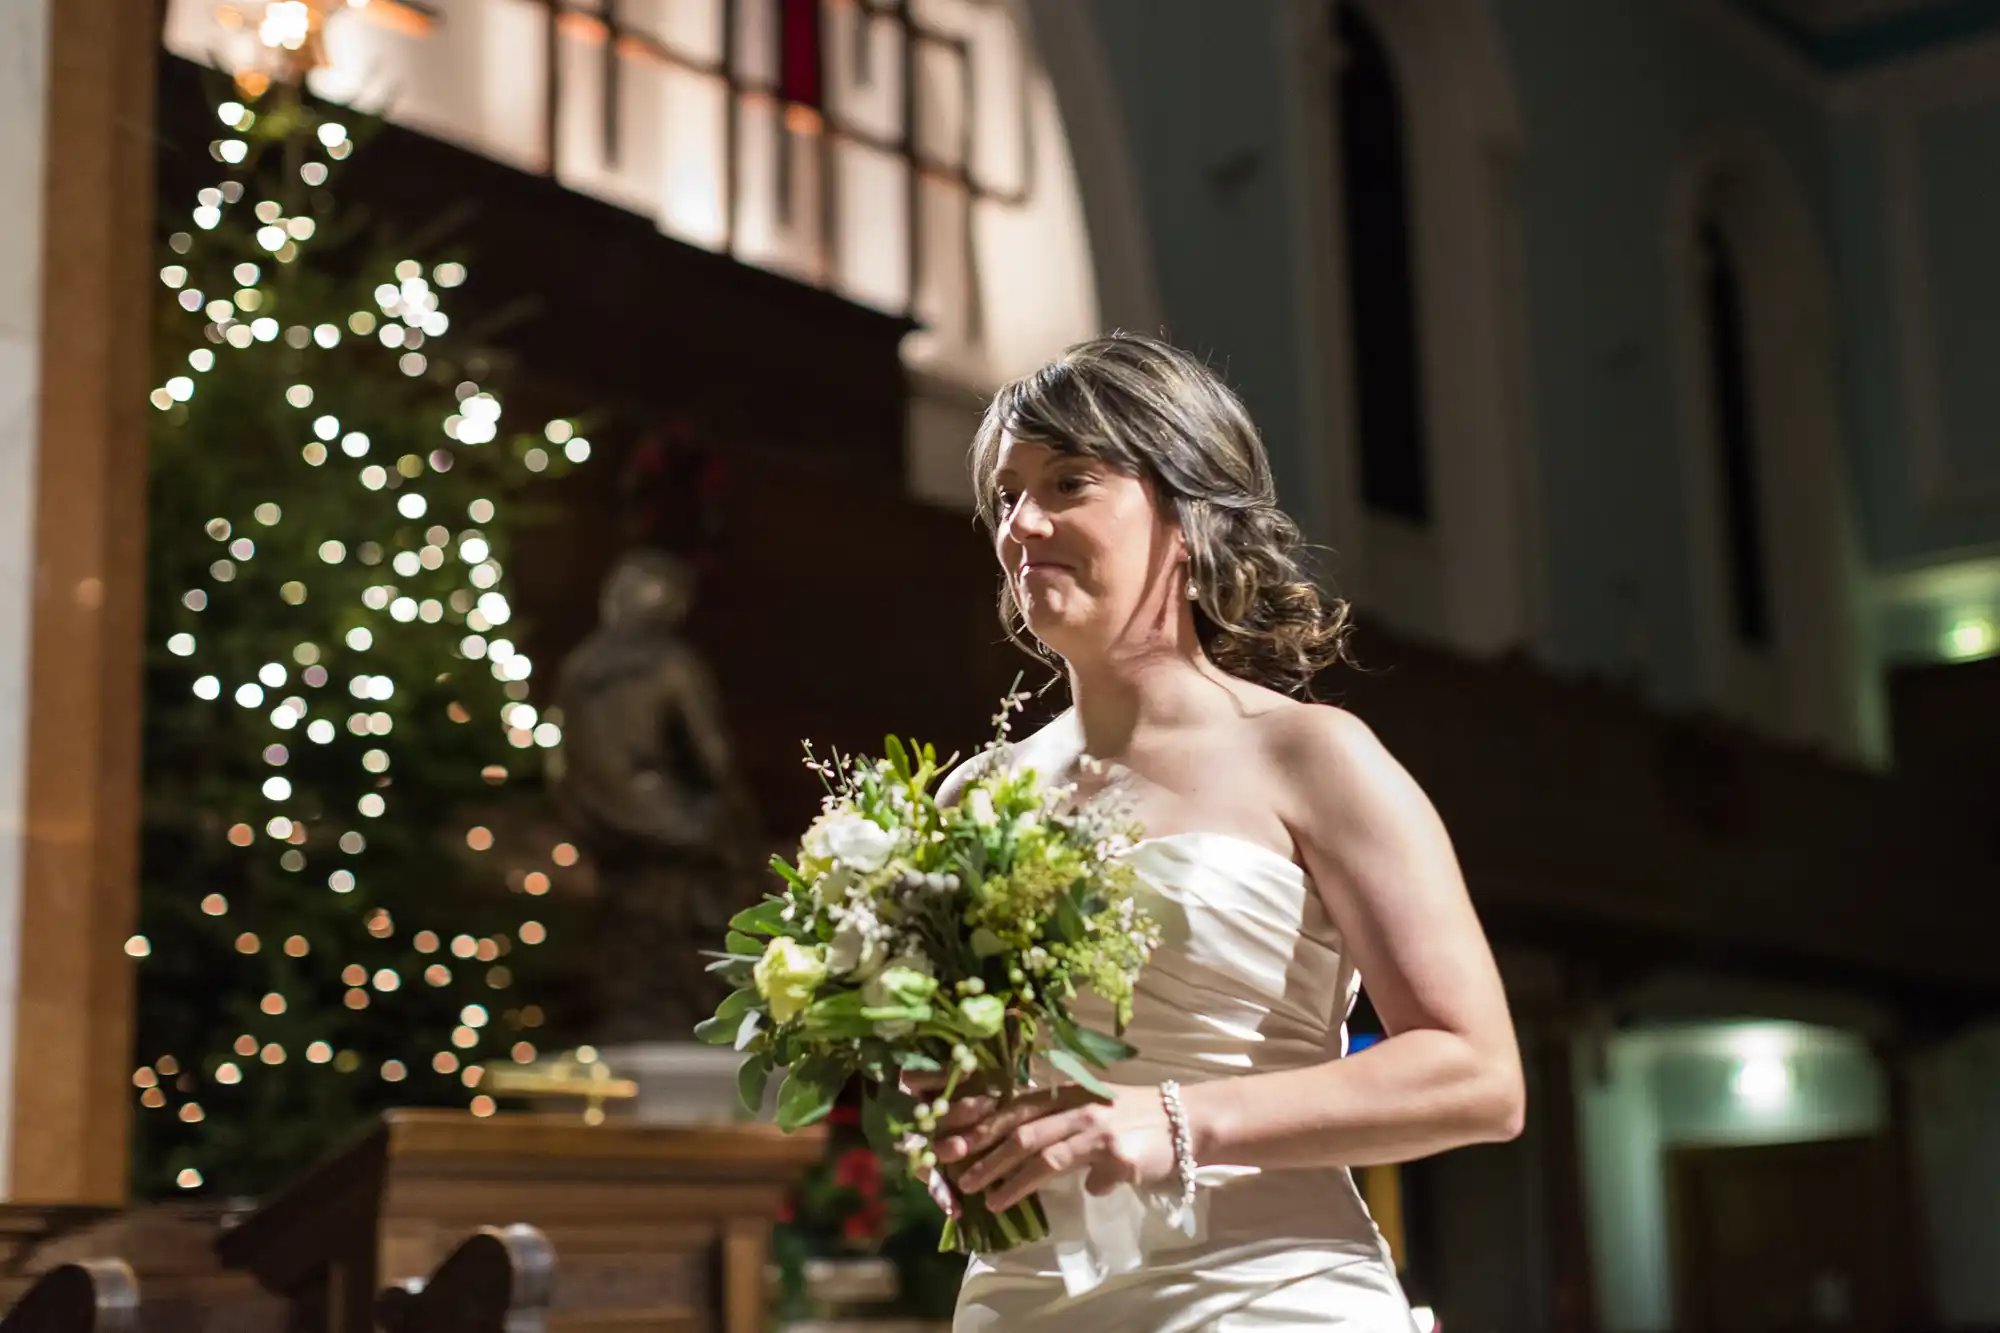 A bride in a white dress holding a bouquet walks down the aisle in a church decorated with string lights.